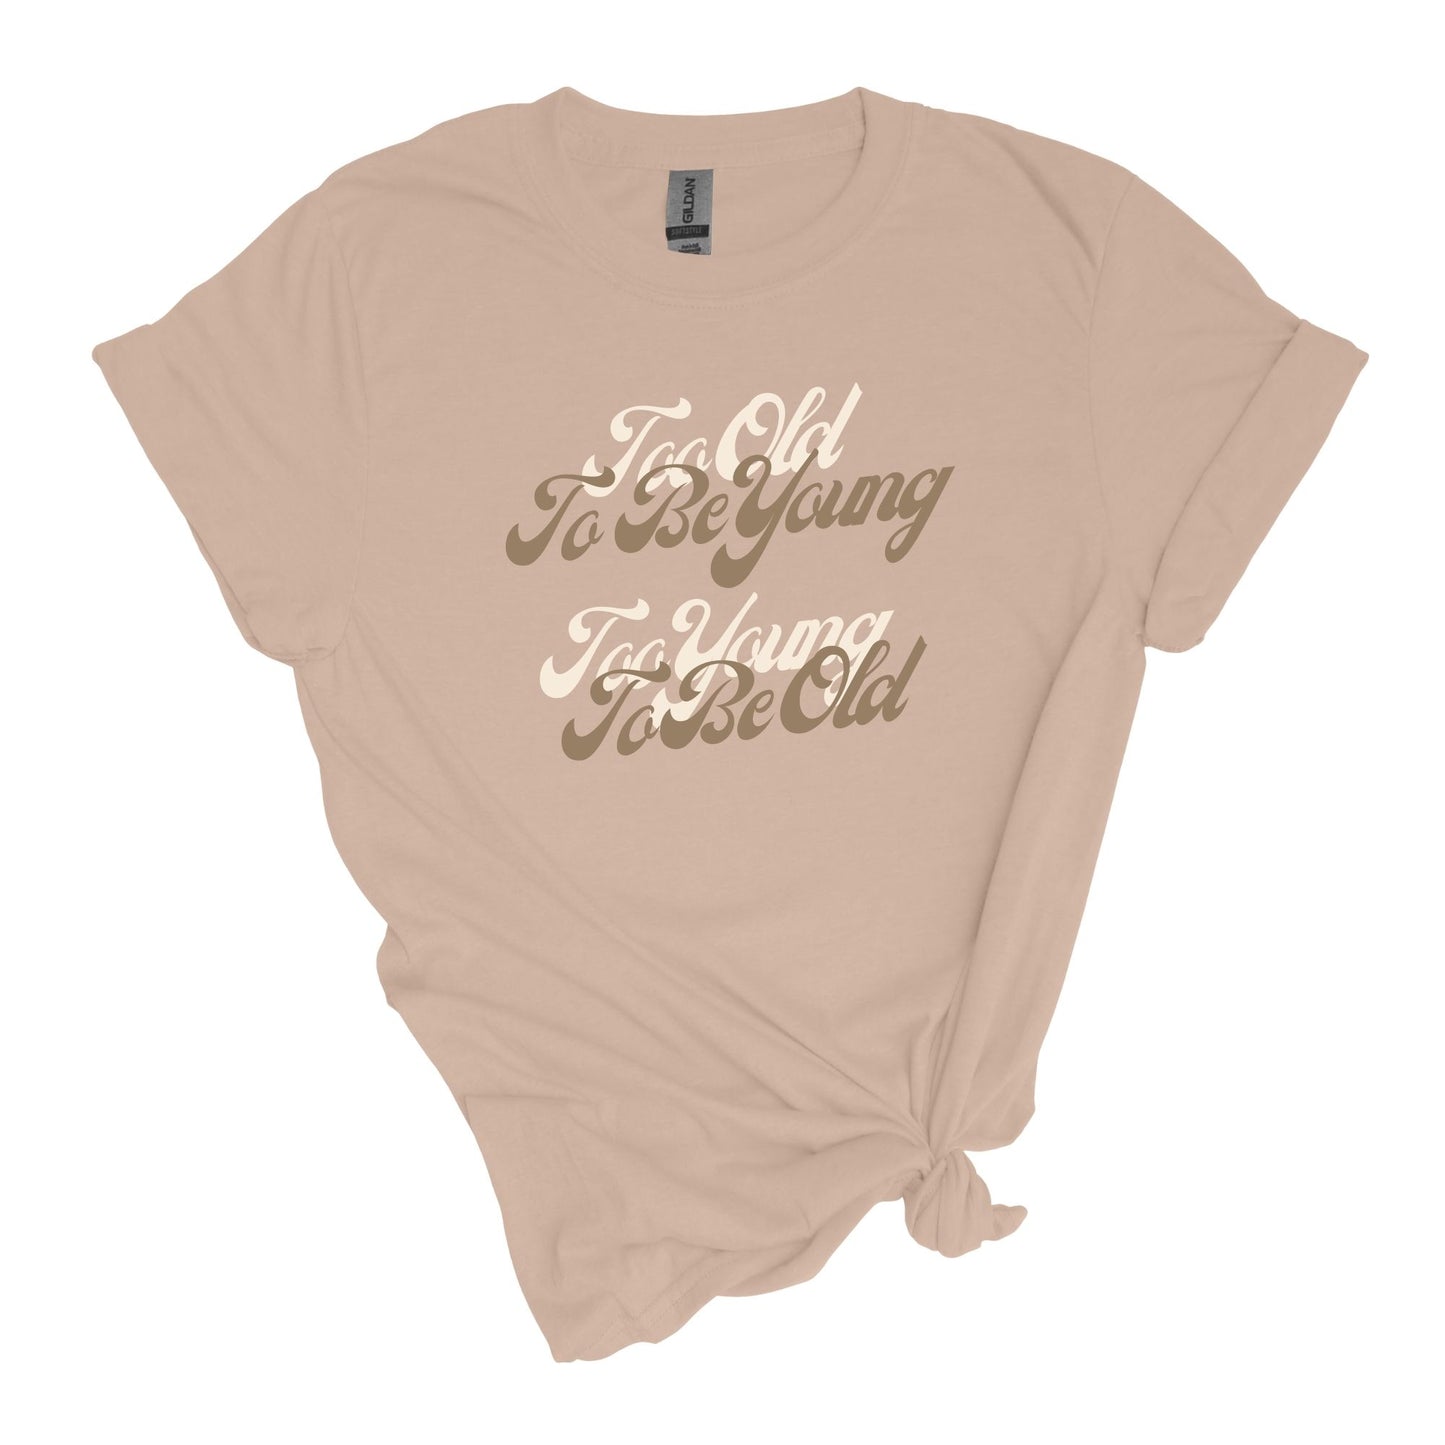 Too Old to be Young, Too Young to be Old - Adult Unisex Soft Style T-shirt